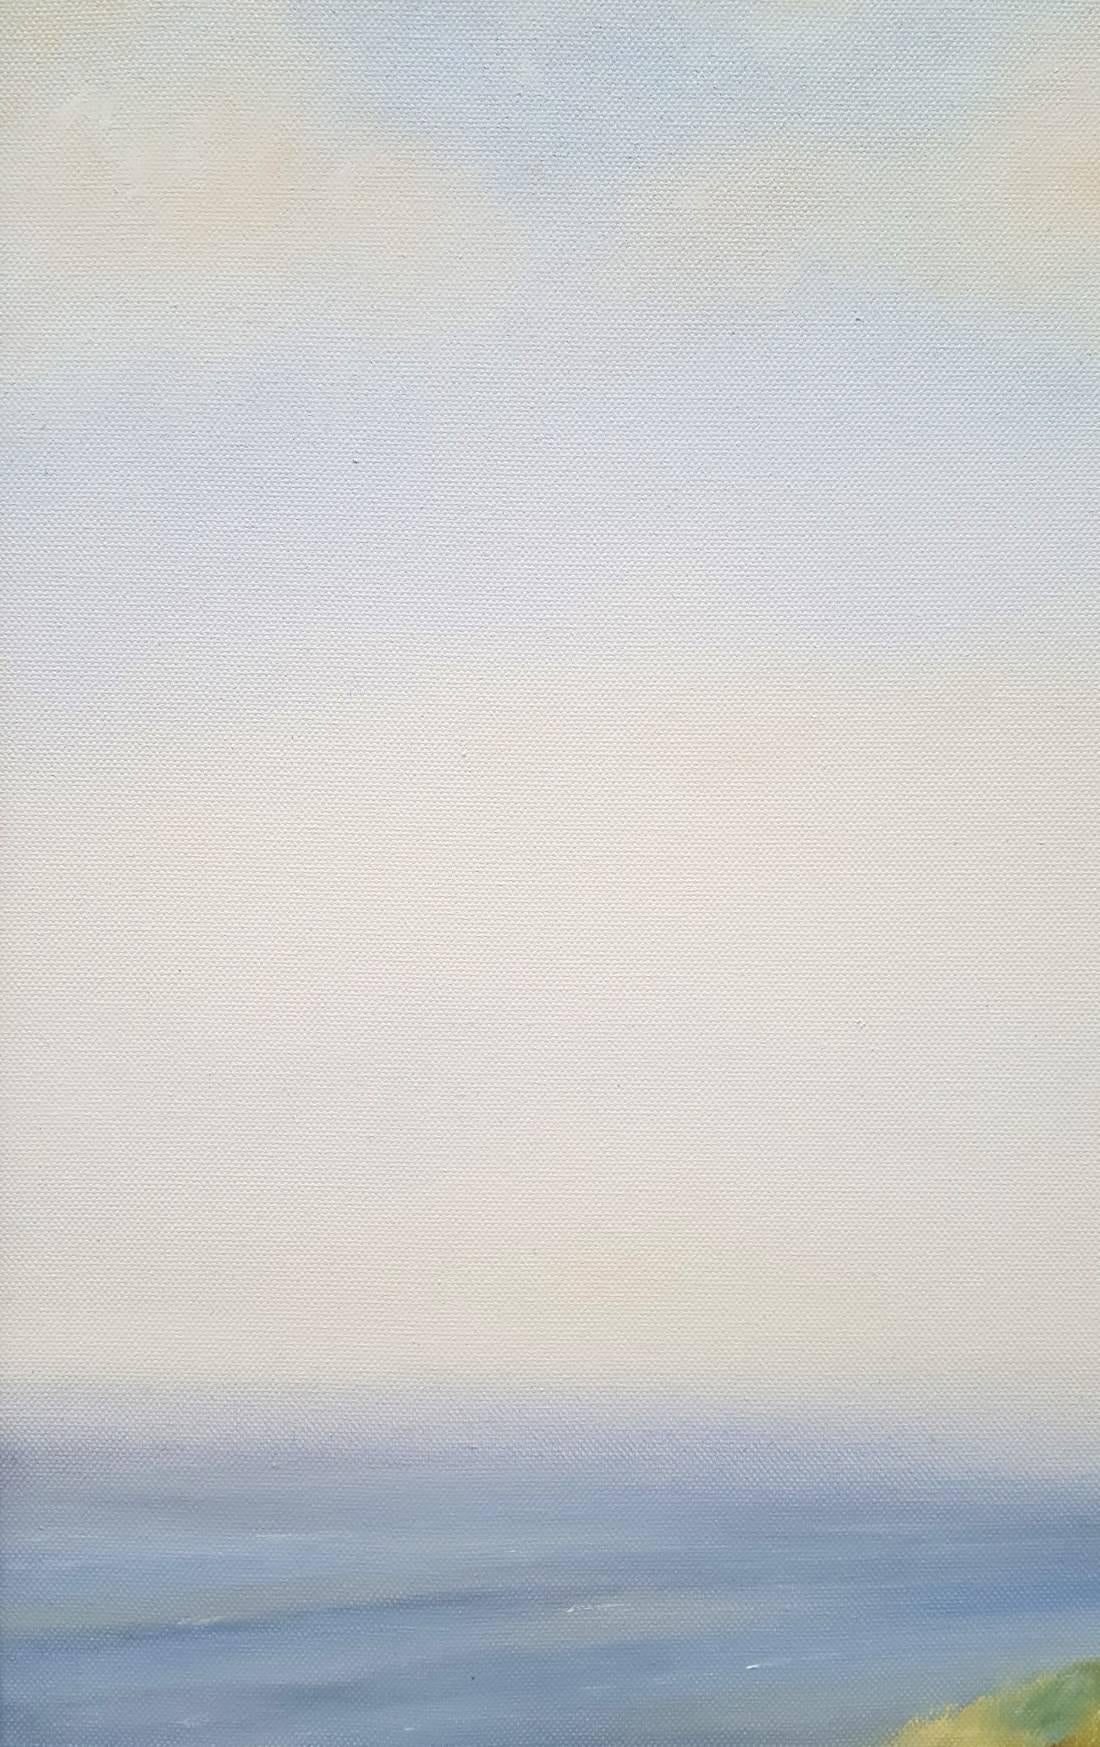 Clearing Mist, Cornwall - Gray Landscape Painting by Alastair Campbell-Binning